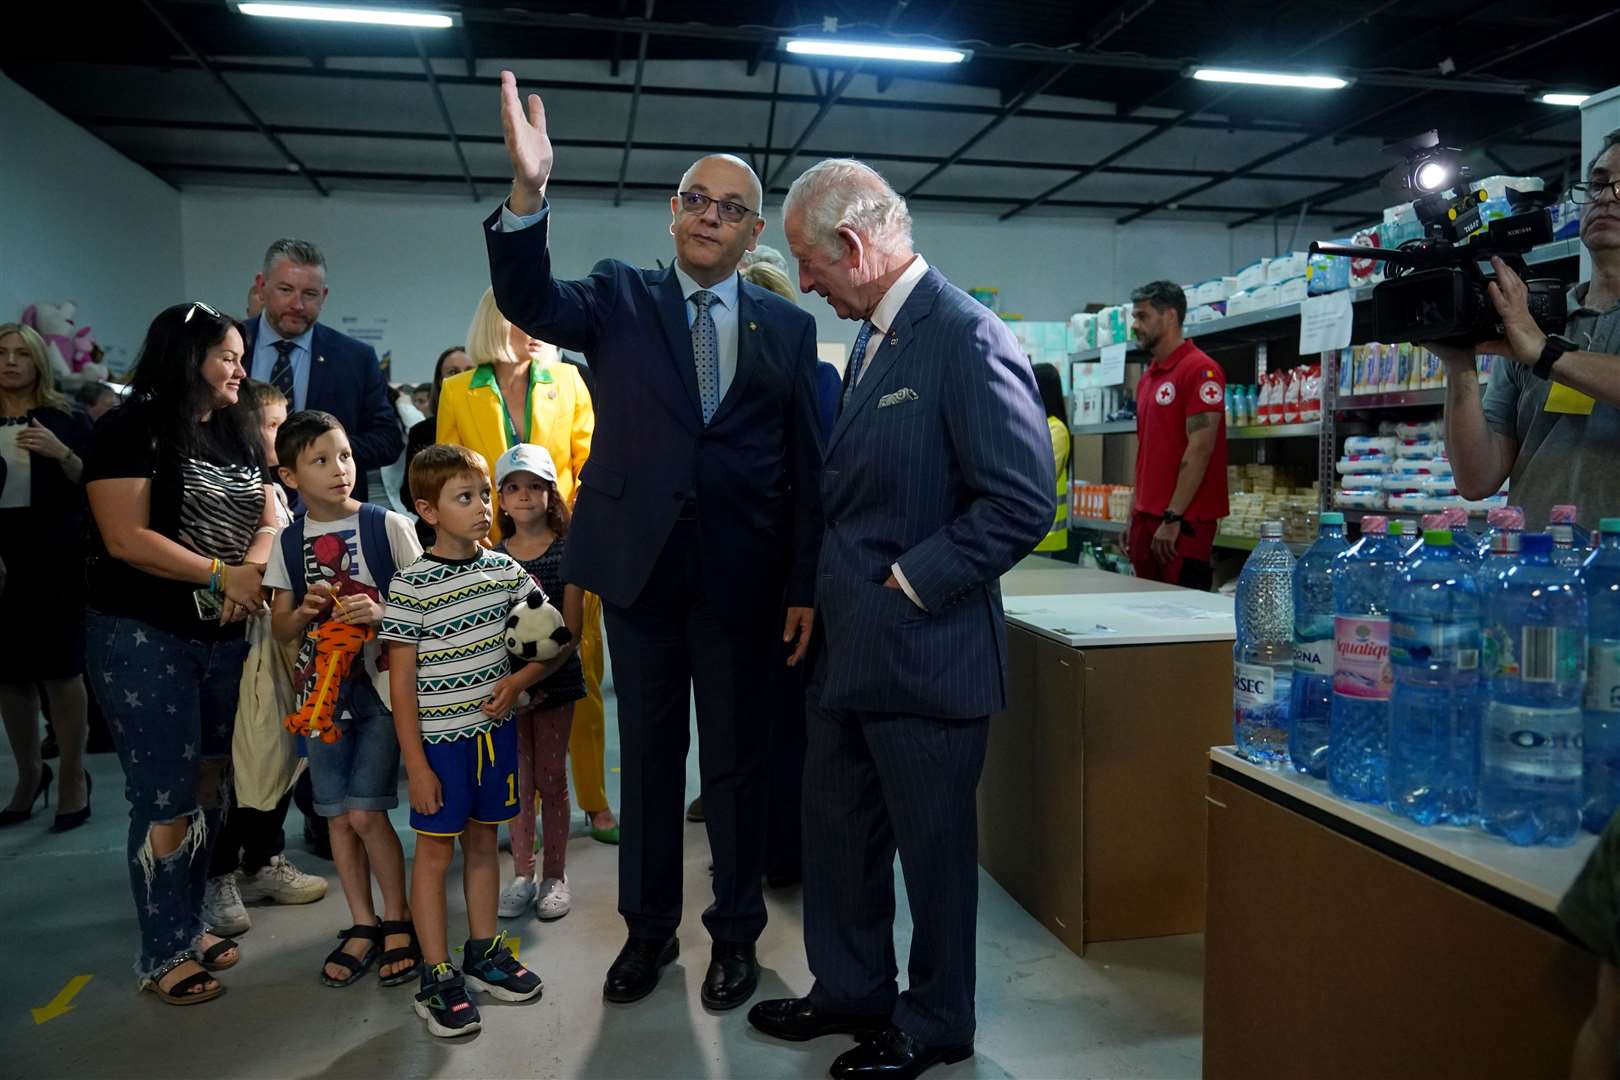 Charles meets officials and refugees at the centre (Yui Mok/PA)